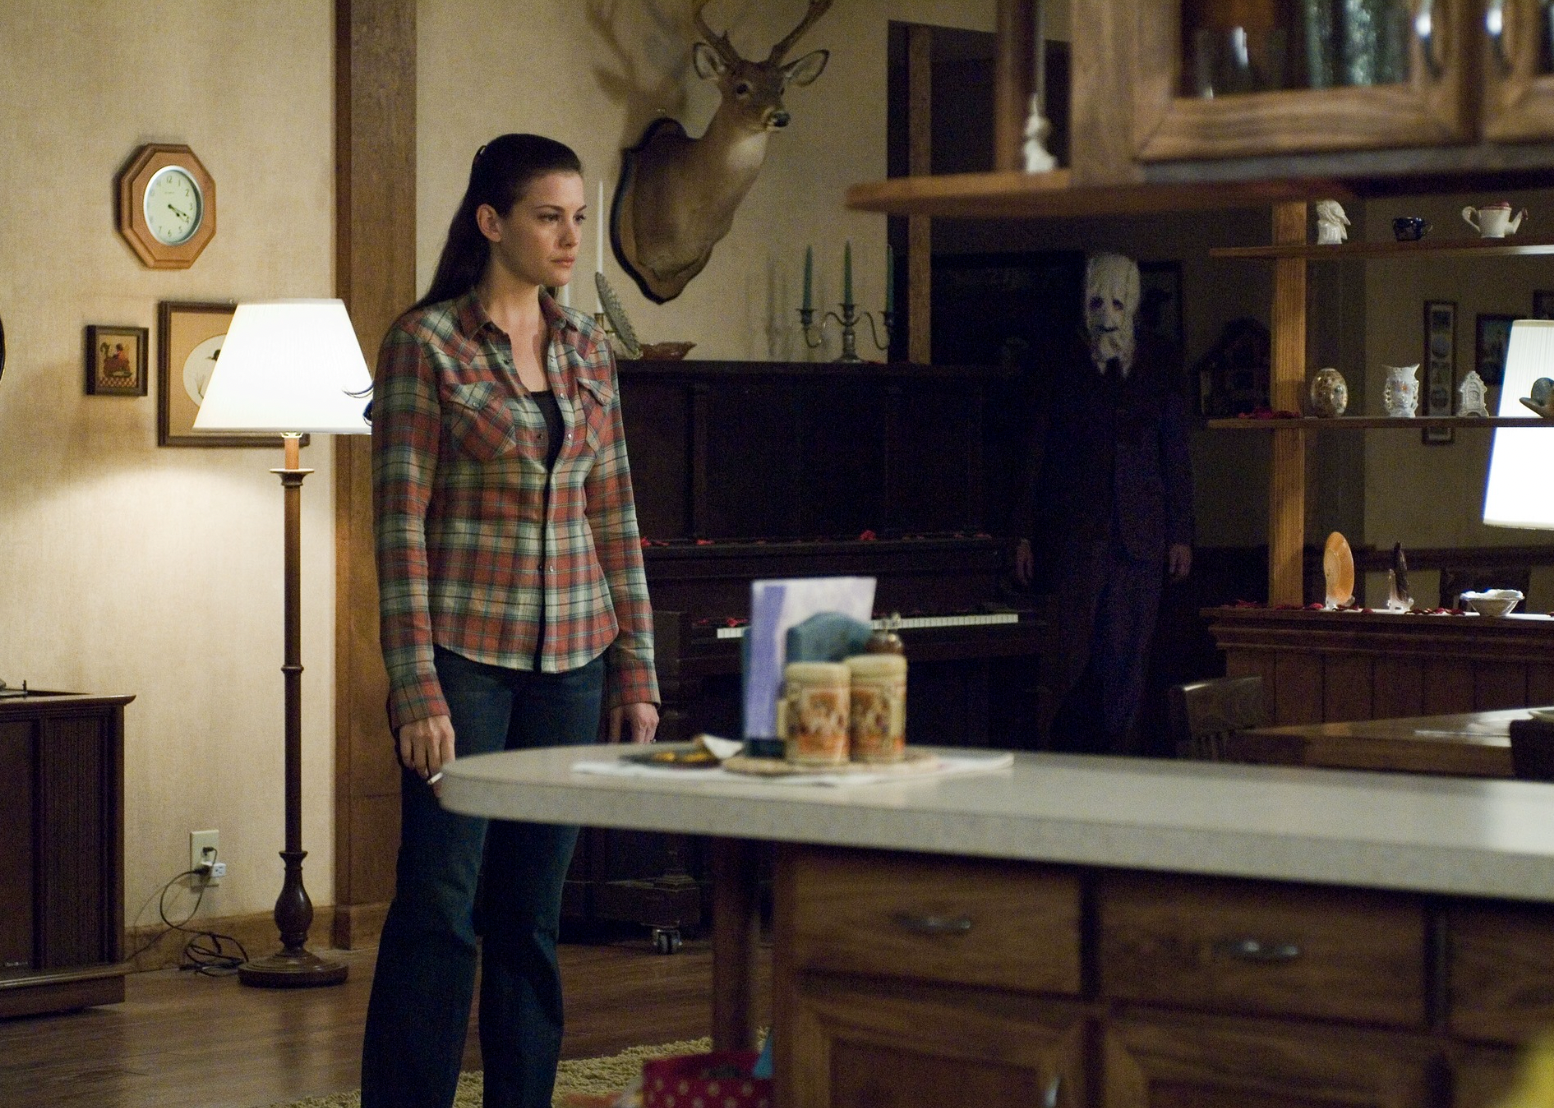 Liv Tyler and Kip Weeks in "The Strangers"